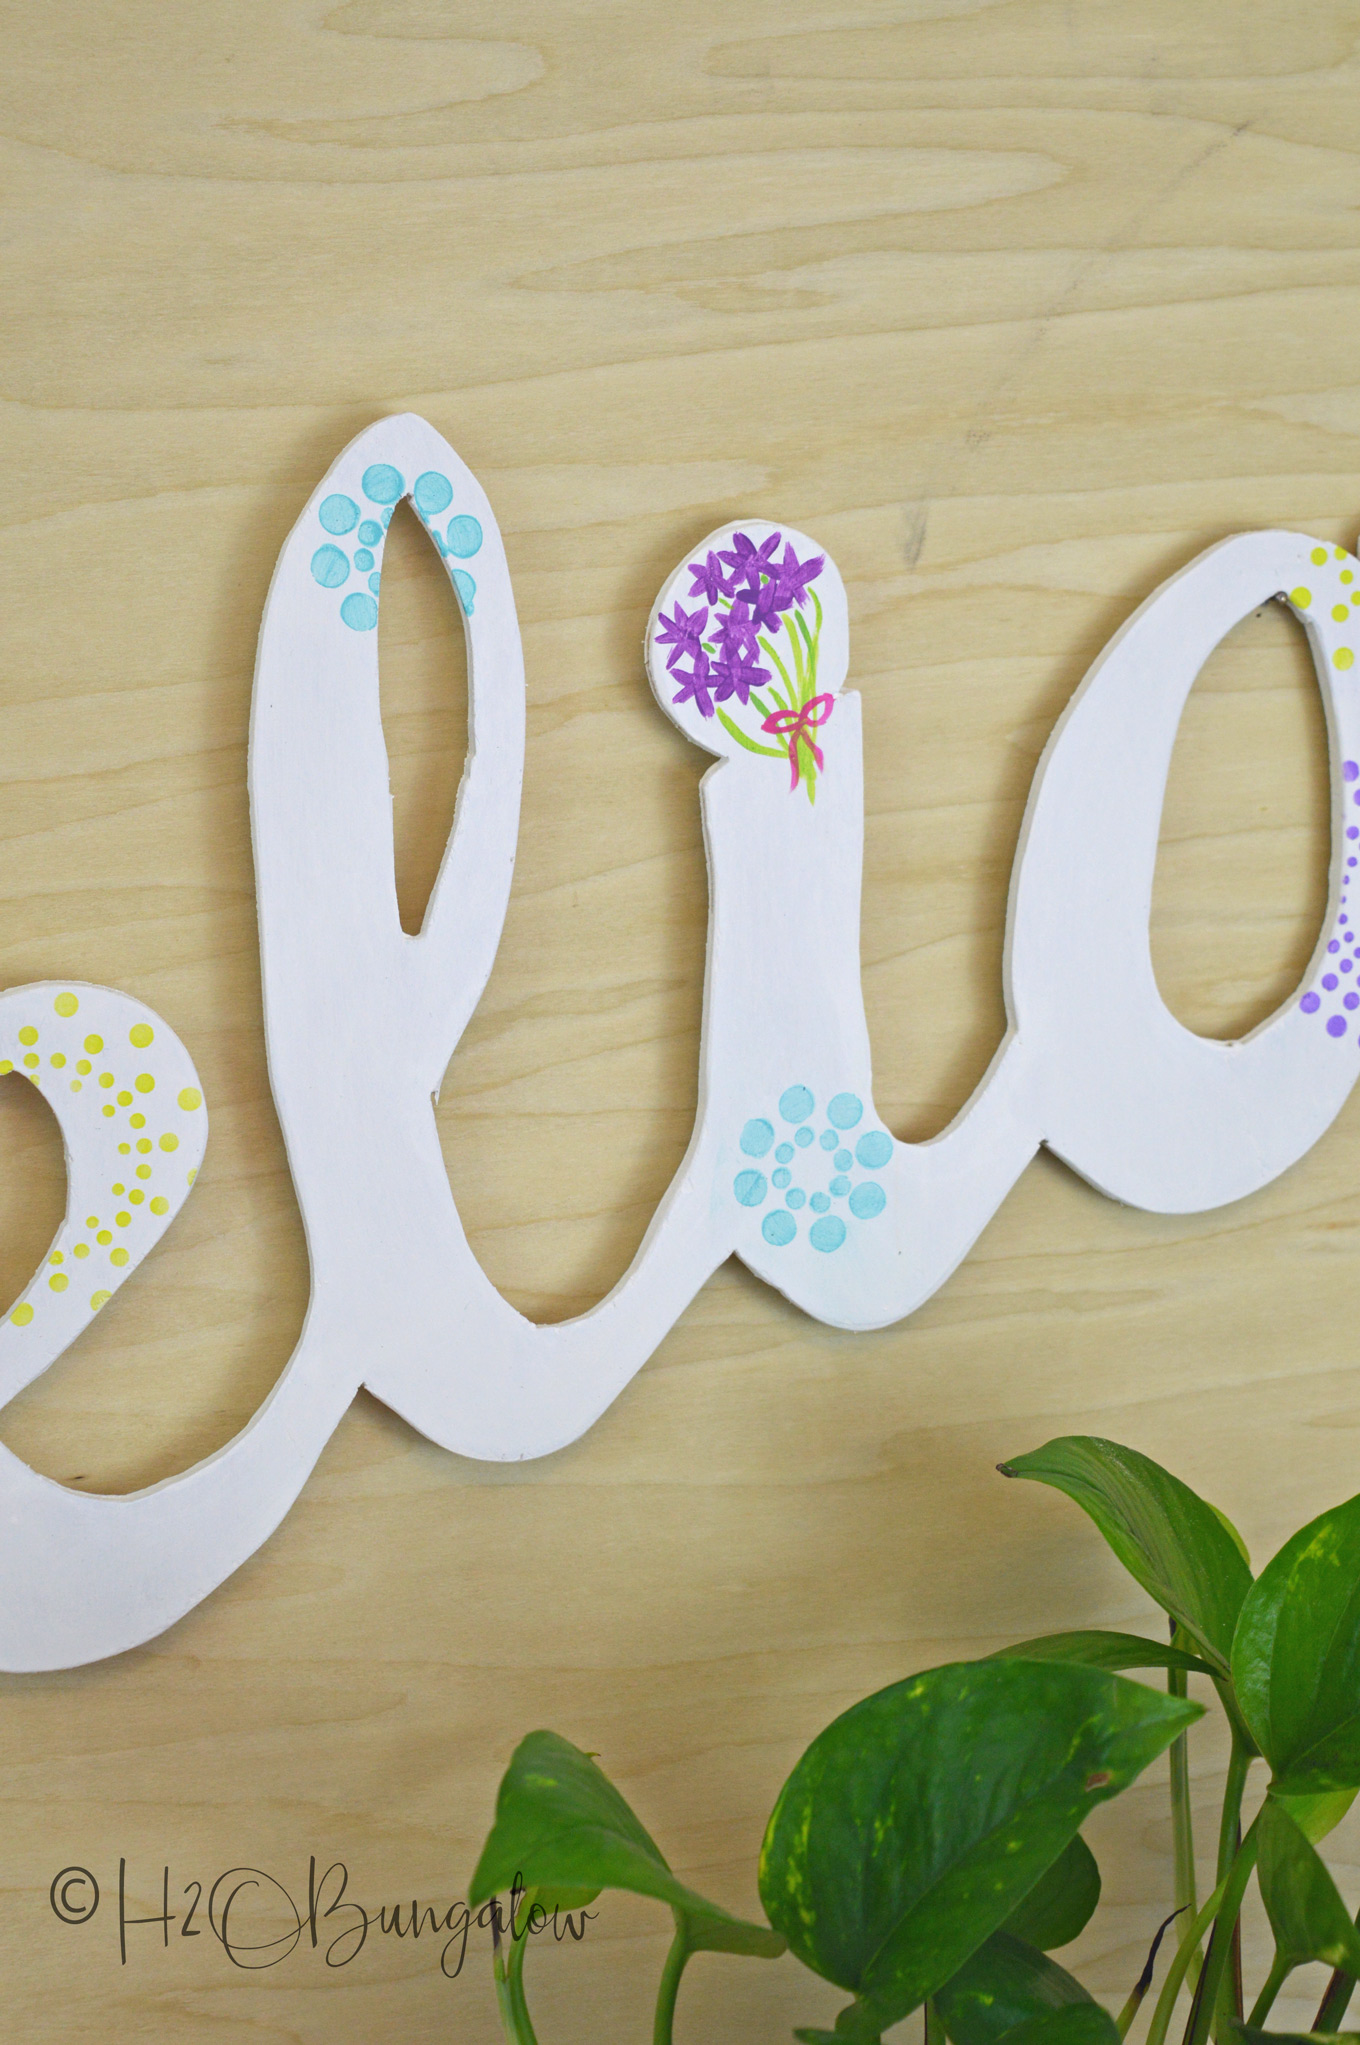 Tutorial to make a DIY large wood name cut out. Easy project to make using a 1/4" piece of scrap plywood, a jigsaw and a palm sander.  I've cut large script letters out of wood before and have a good tutorial which I link to below.  This post shares more tips for making clean cuts when cutting out words with a jigsaw.